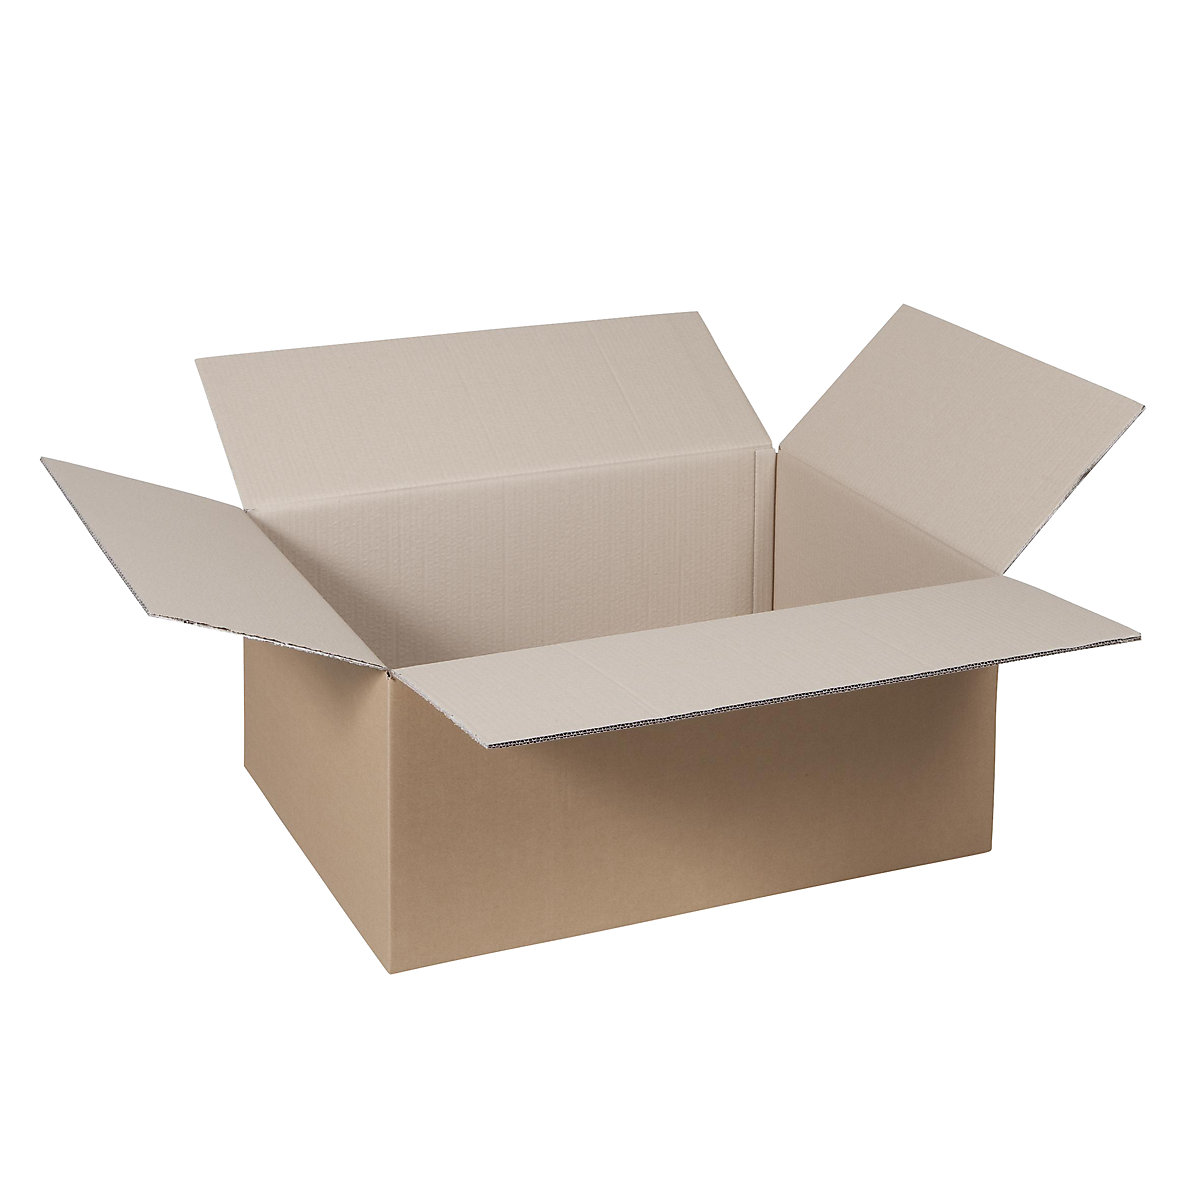 Folding cardboard box, FEFCO 0201, made of double fluted cardboard, internal dimensions 400 x 300 x 200 mm, pack of 50-9